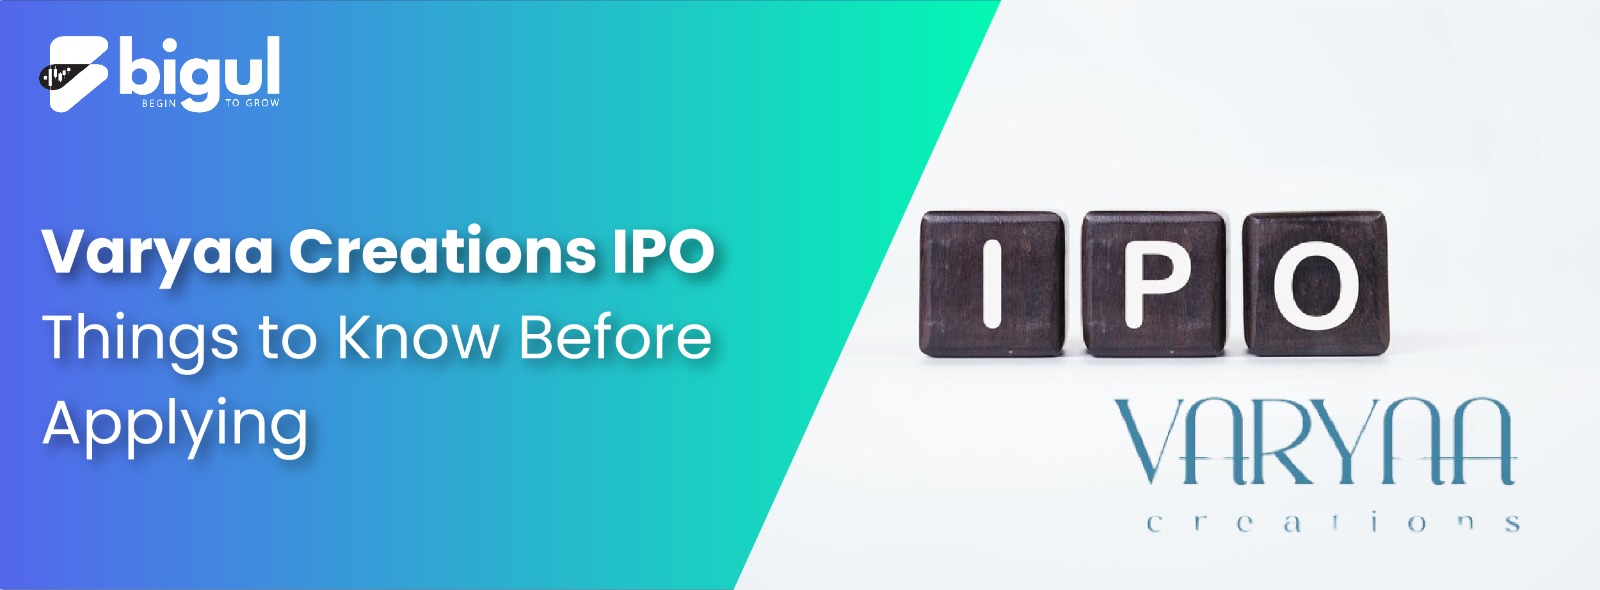 Varyaa Creations IPO: Things to Know Before Applying